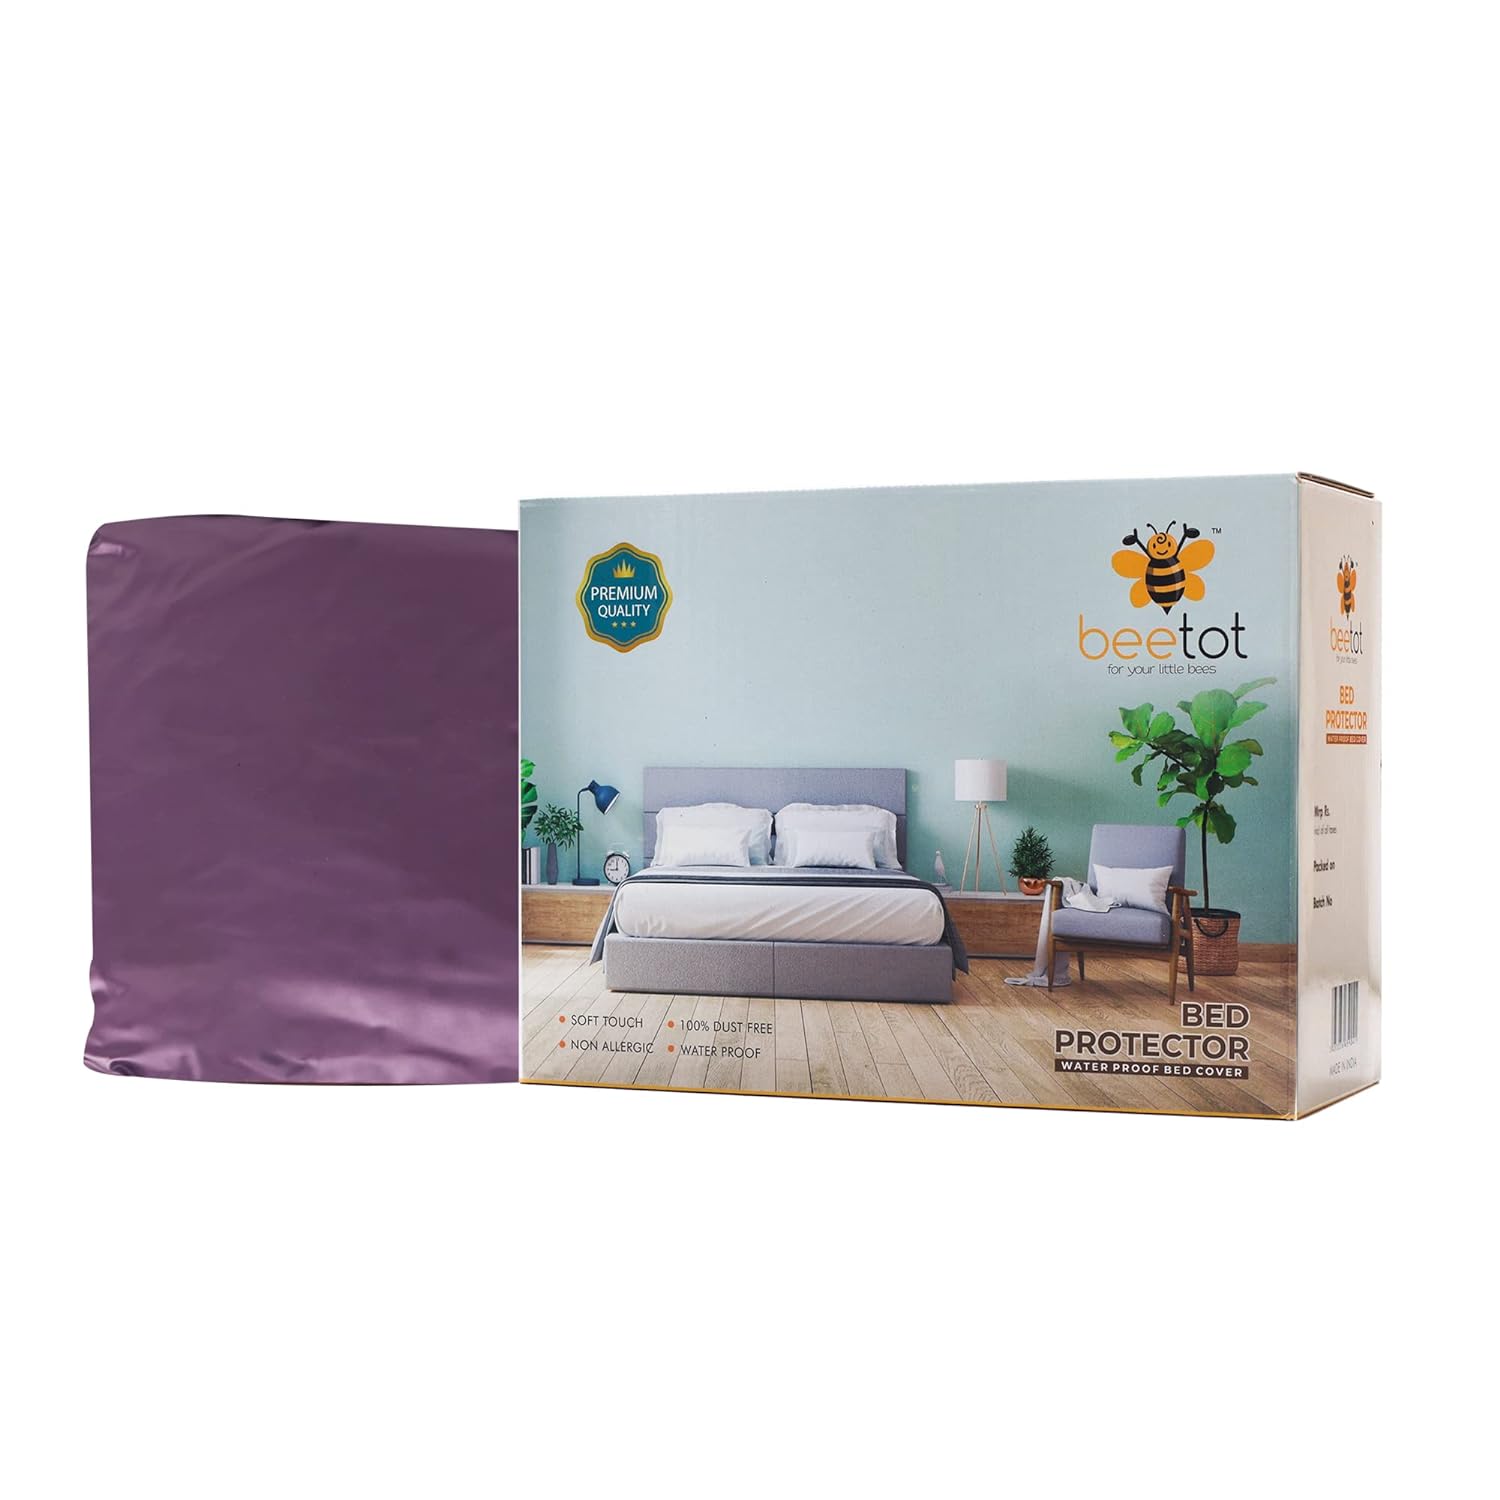 PVC Water Proof and Dust Proof Double Bed Cover, Mattress Protector, Non-Toxic Bed Protector, Mattress Cover (Violet)